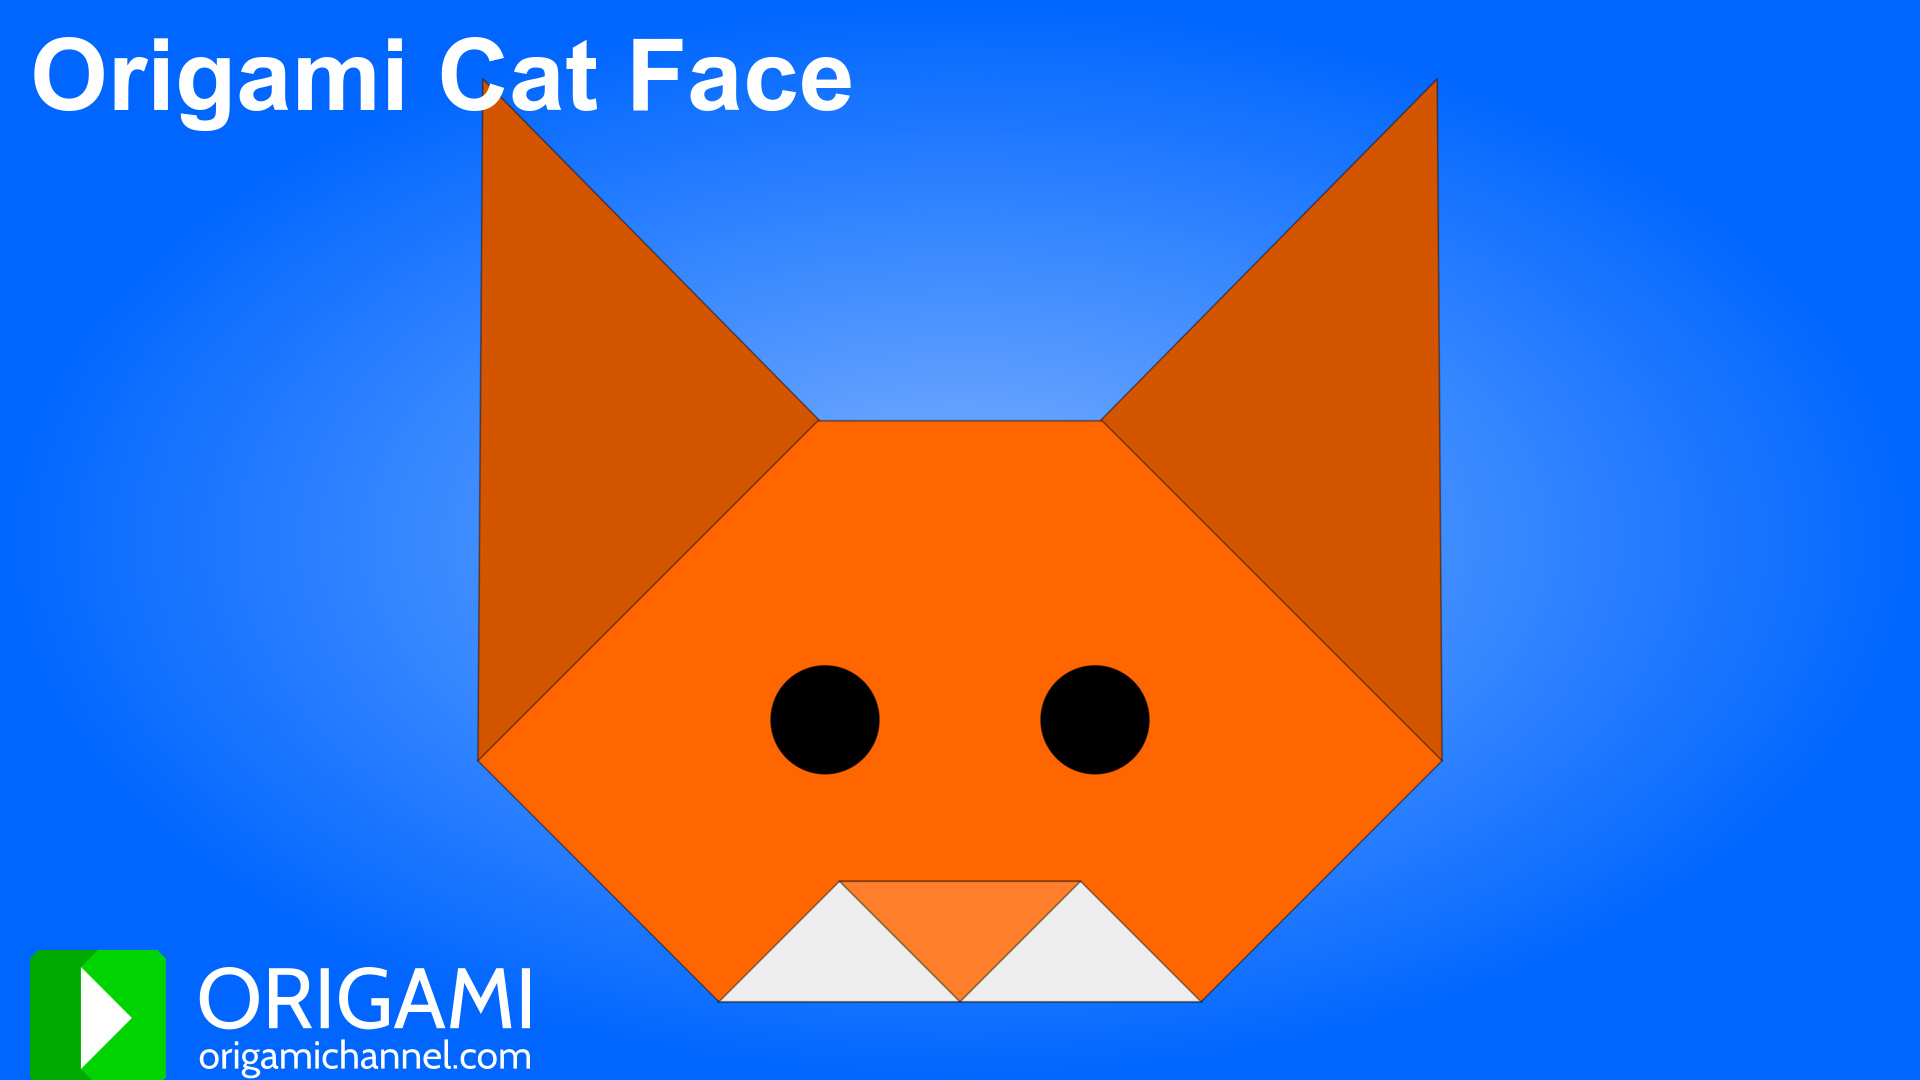 How To Make An Origami Cat Face Origami Cat Face